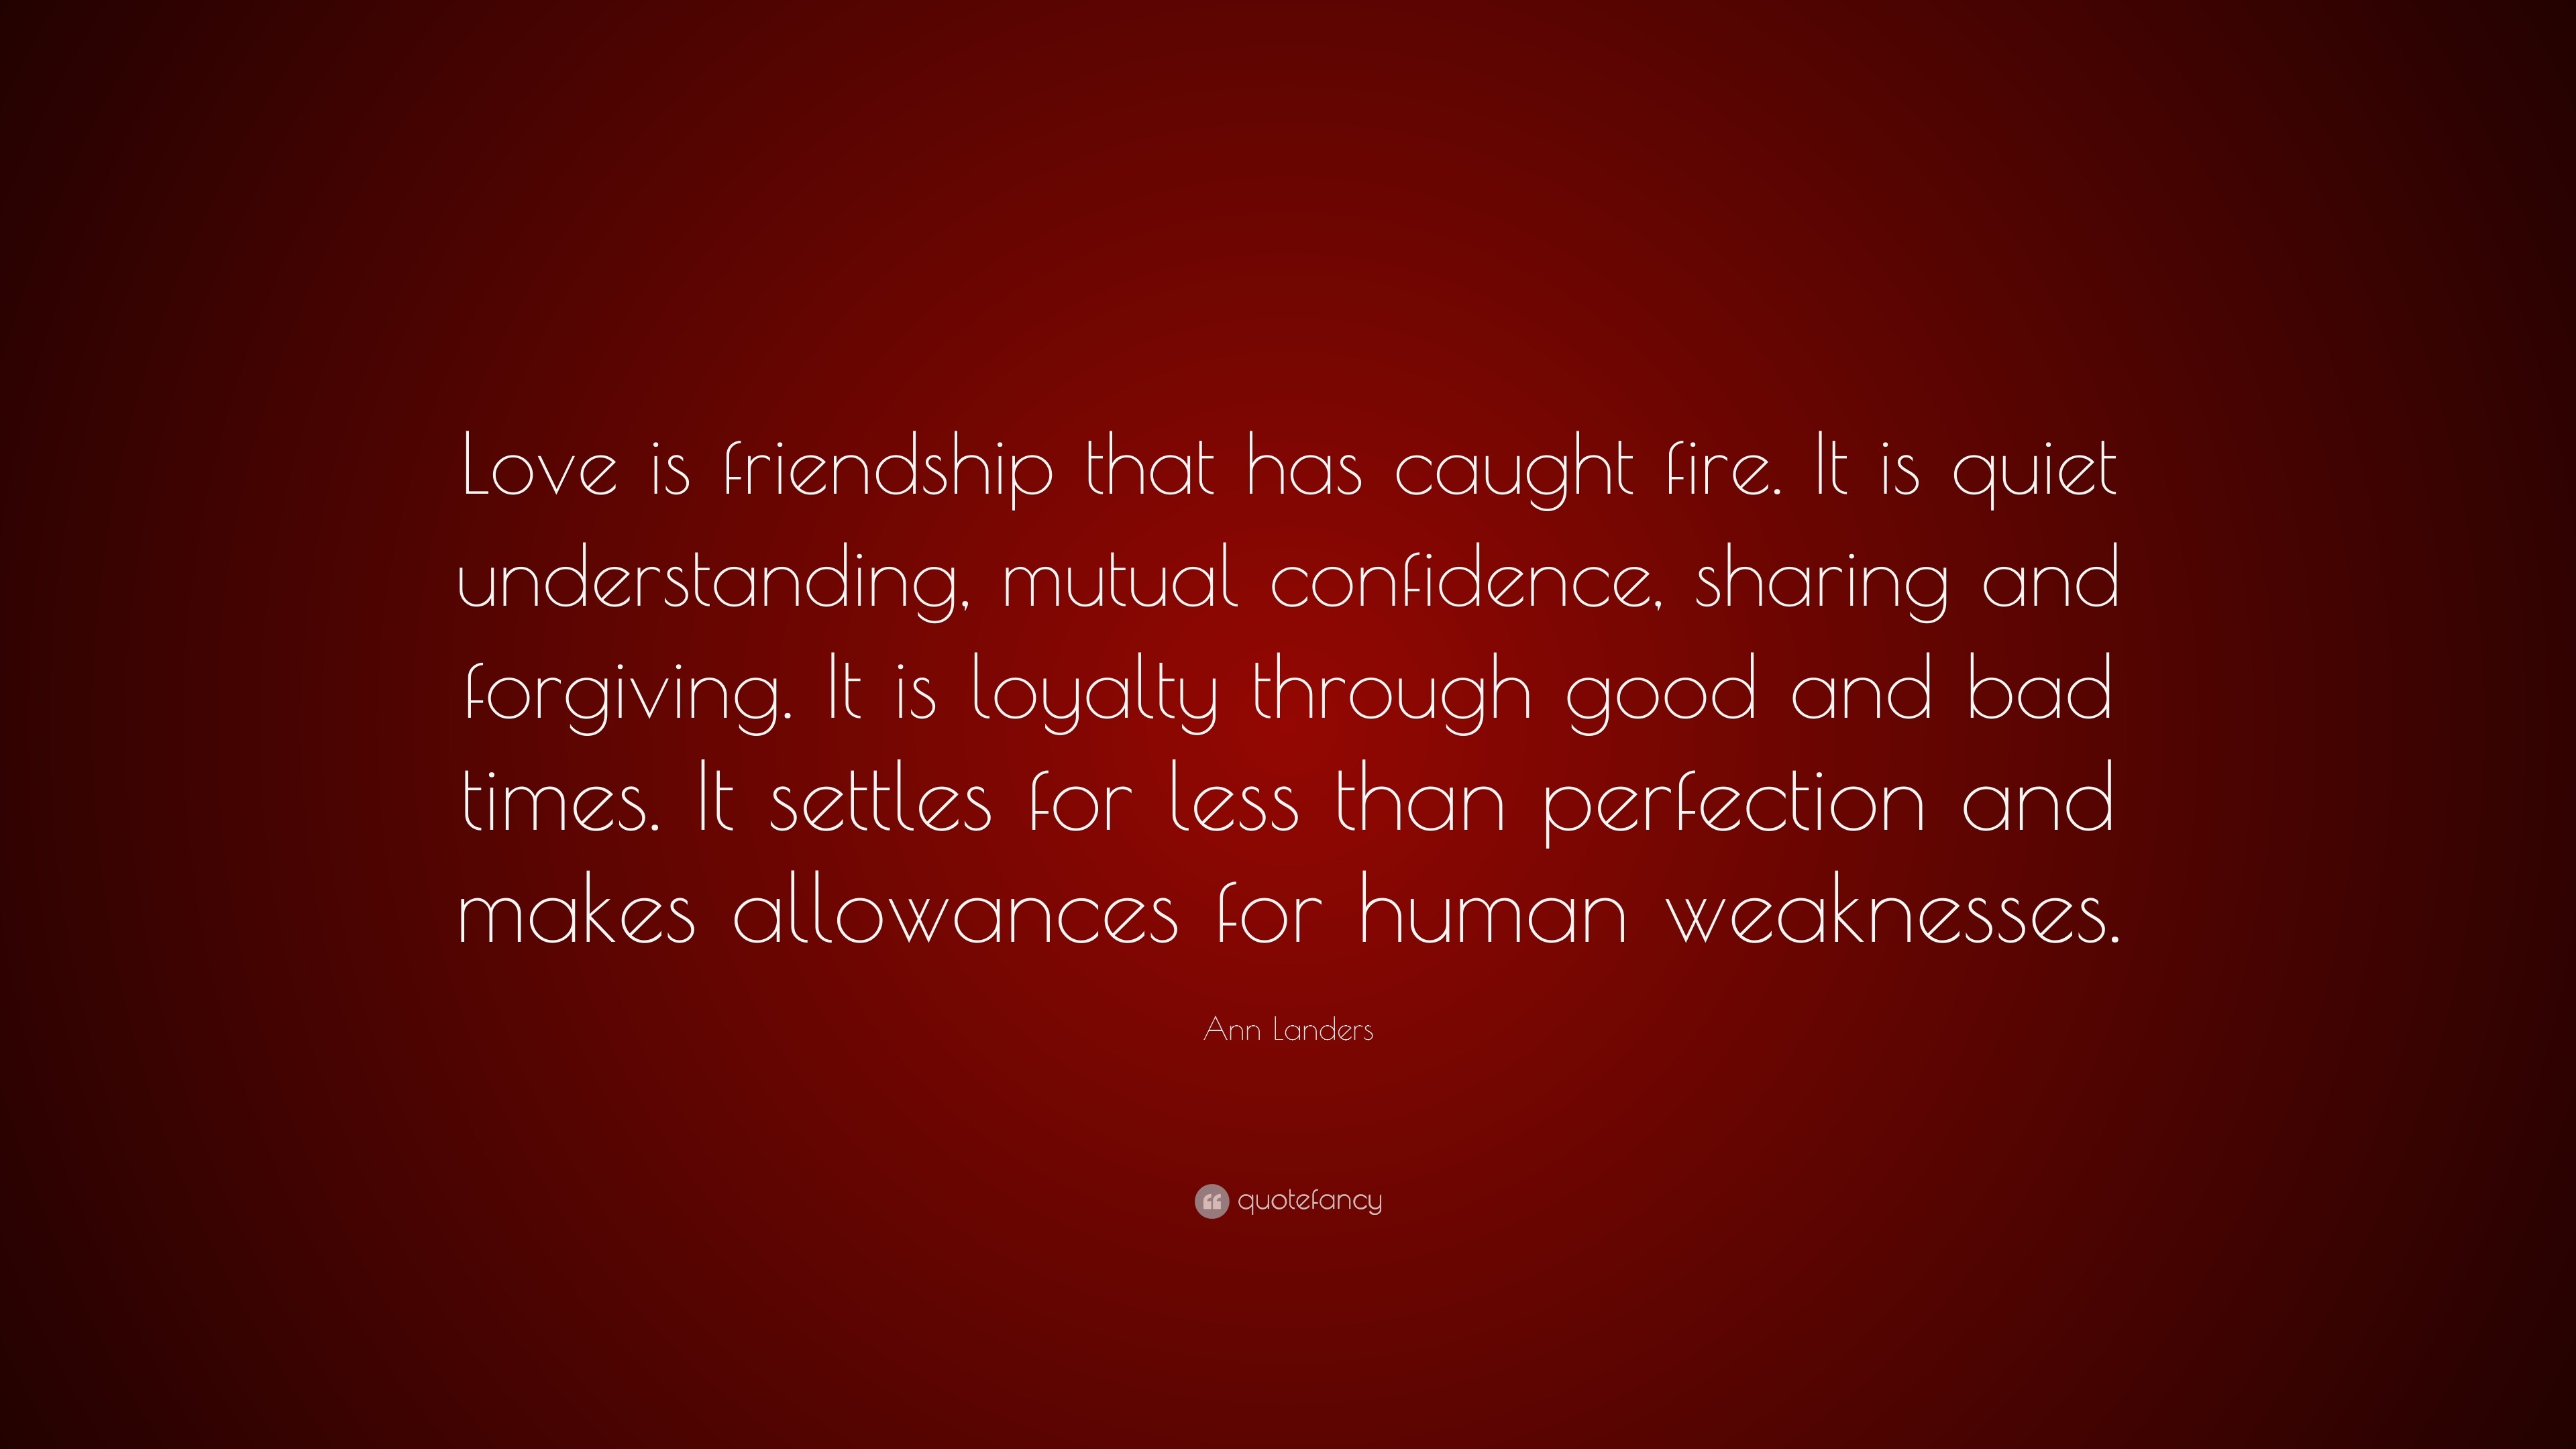 Ann Landers Quote “Love is friendship that has caught fire It is quiet